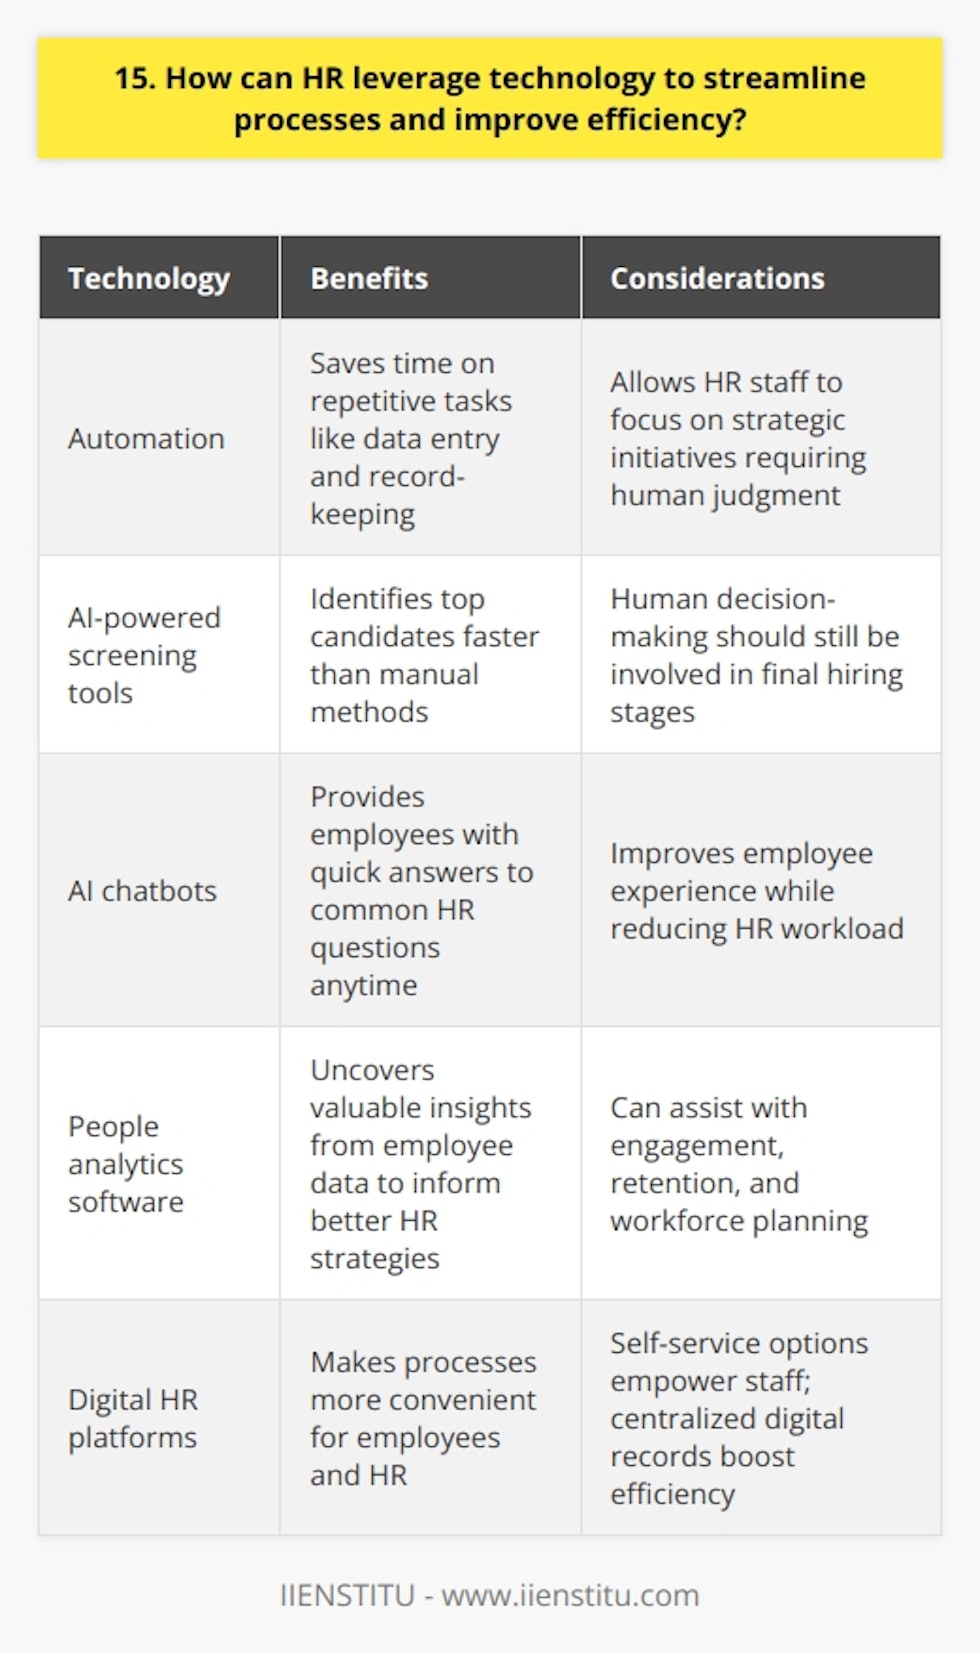 As an HR professional, I believe that technology can be a powerful tool to streamline processes and improve efficiency. Here are some ways I think HR can leverage technology: Automating Repetitive Tasks In my experience, automating repetitive HR tasks like data entry and record-keeping can save a lot of time. This frees up HR staff to focus on more strategic initiatives that require human judgment and creativity. Using AI for Screening and Hiring Ive seen how AI-powered tools can help screen resumes and identify top candidates much faster than manual methods. However, its important to still involve human decision-making in the final hiring stages. Chatbots for Employee Questions Implementing AI chatbots can provide employees with quick answers to common HR questions anytime. This improves employee experience while reducing the workload on HR personnel. People Analytics for Insights I believe people analytics software can uncover valuable insights from employee data that may otherwise go unnoticed. This can inform better HR strategies for engagement, retention, and workforce planning. Digital HR Platforms In my opinion, moving HR processes to user-friendly digital platforms makes things more convenient for both employees and HR. Self-service options empower staff while centralized digital records boost HR efficiency. These are just some of the many exciting ways I think HR can harness technology to work smarter, not harder. The key is striking the right balance between automation and the irreplaceable human element!